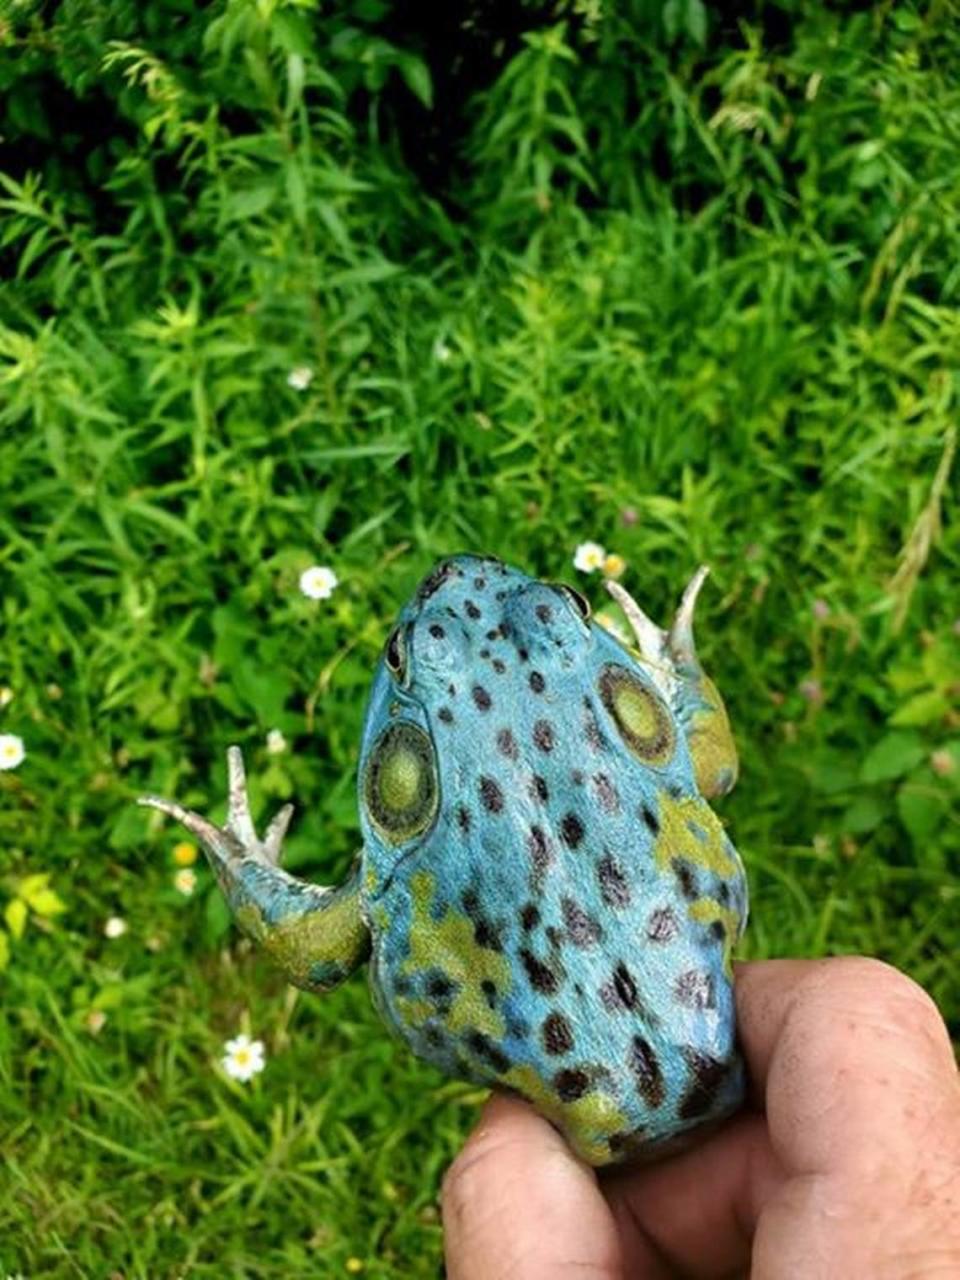 Ohio man Matt Minnich recently found and photographed an extremely rare blue bullfrog, sharing the photos with the Ohio Department of Natural Resources.